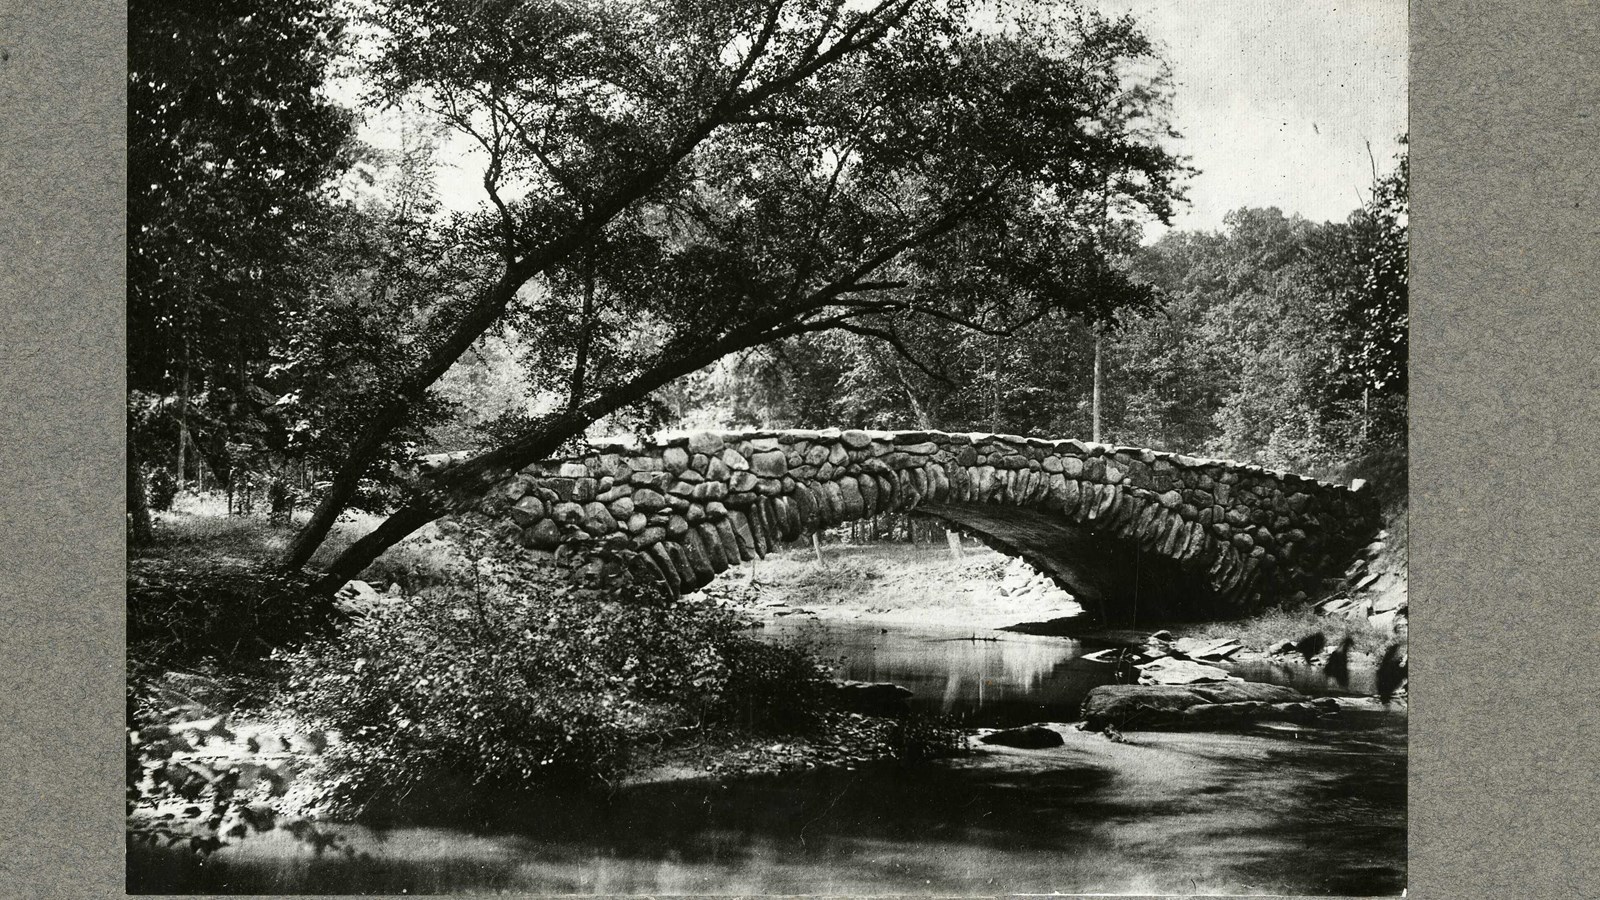 Black and white of stone bridge over water with trees on both sides, one hanging over bridge